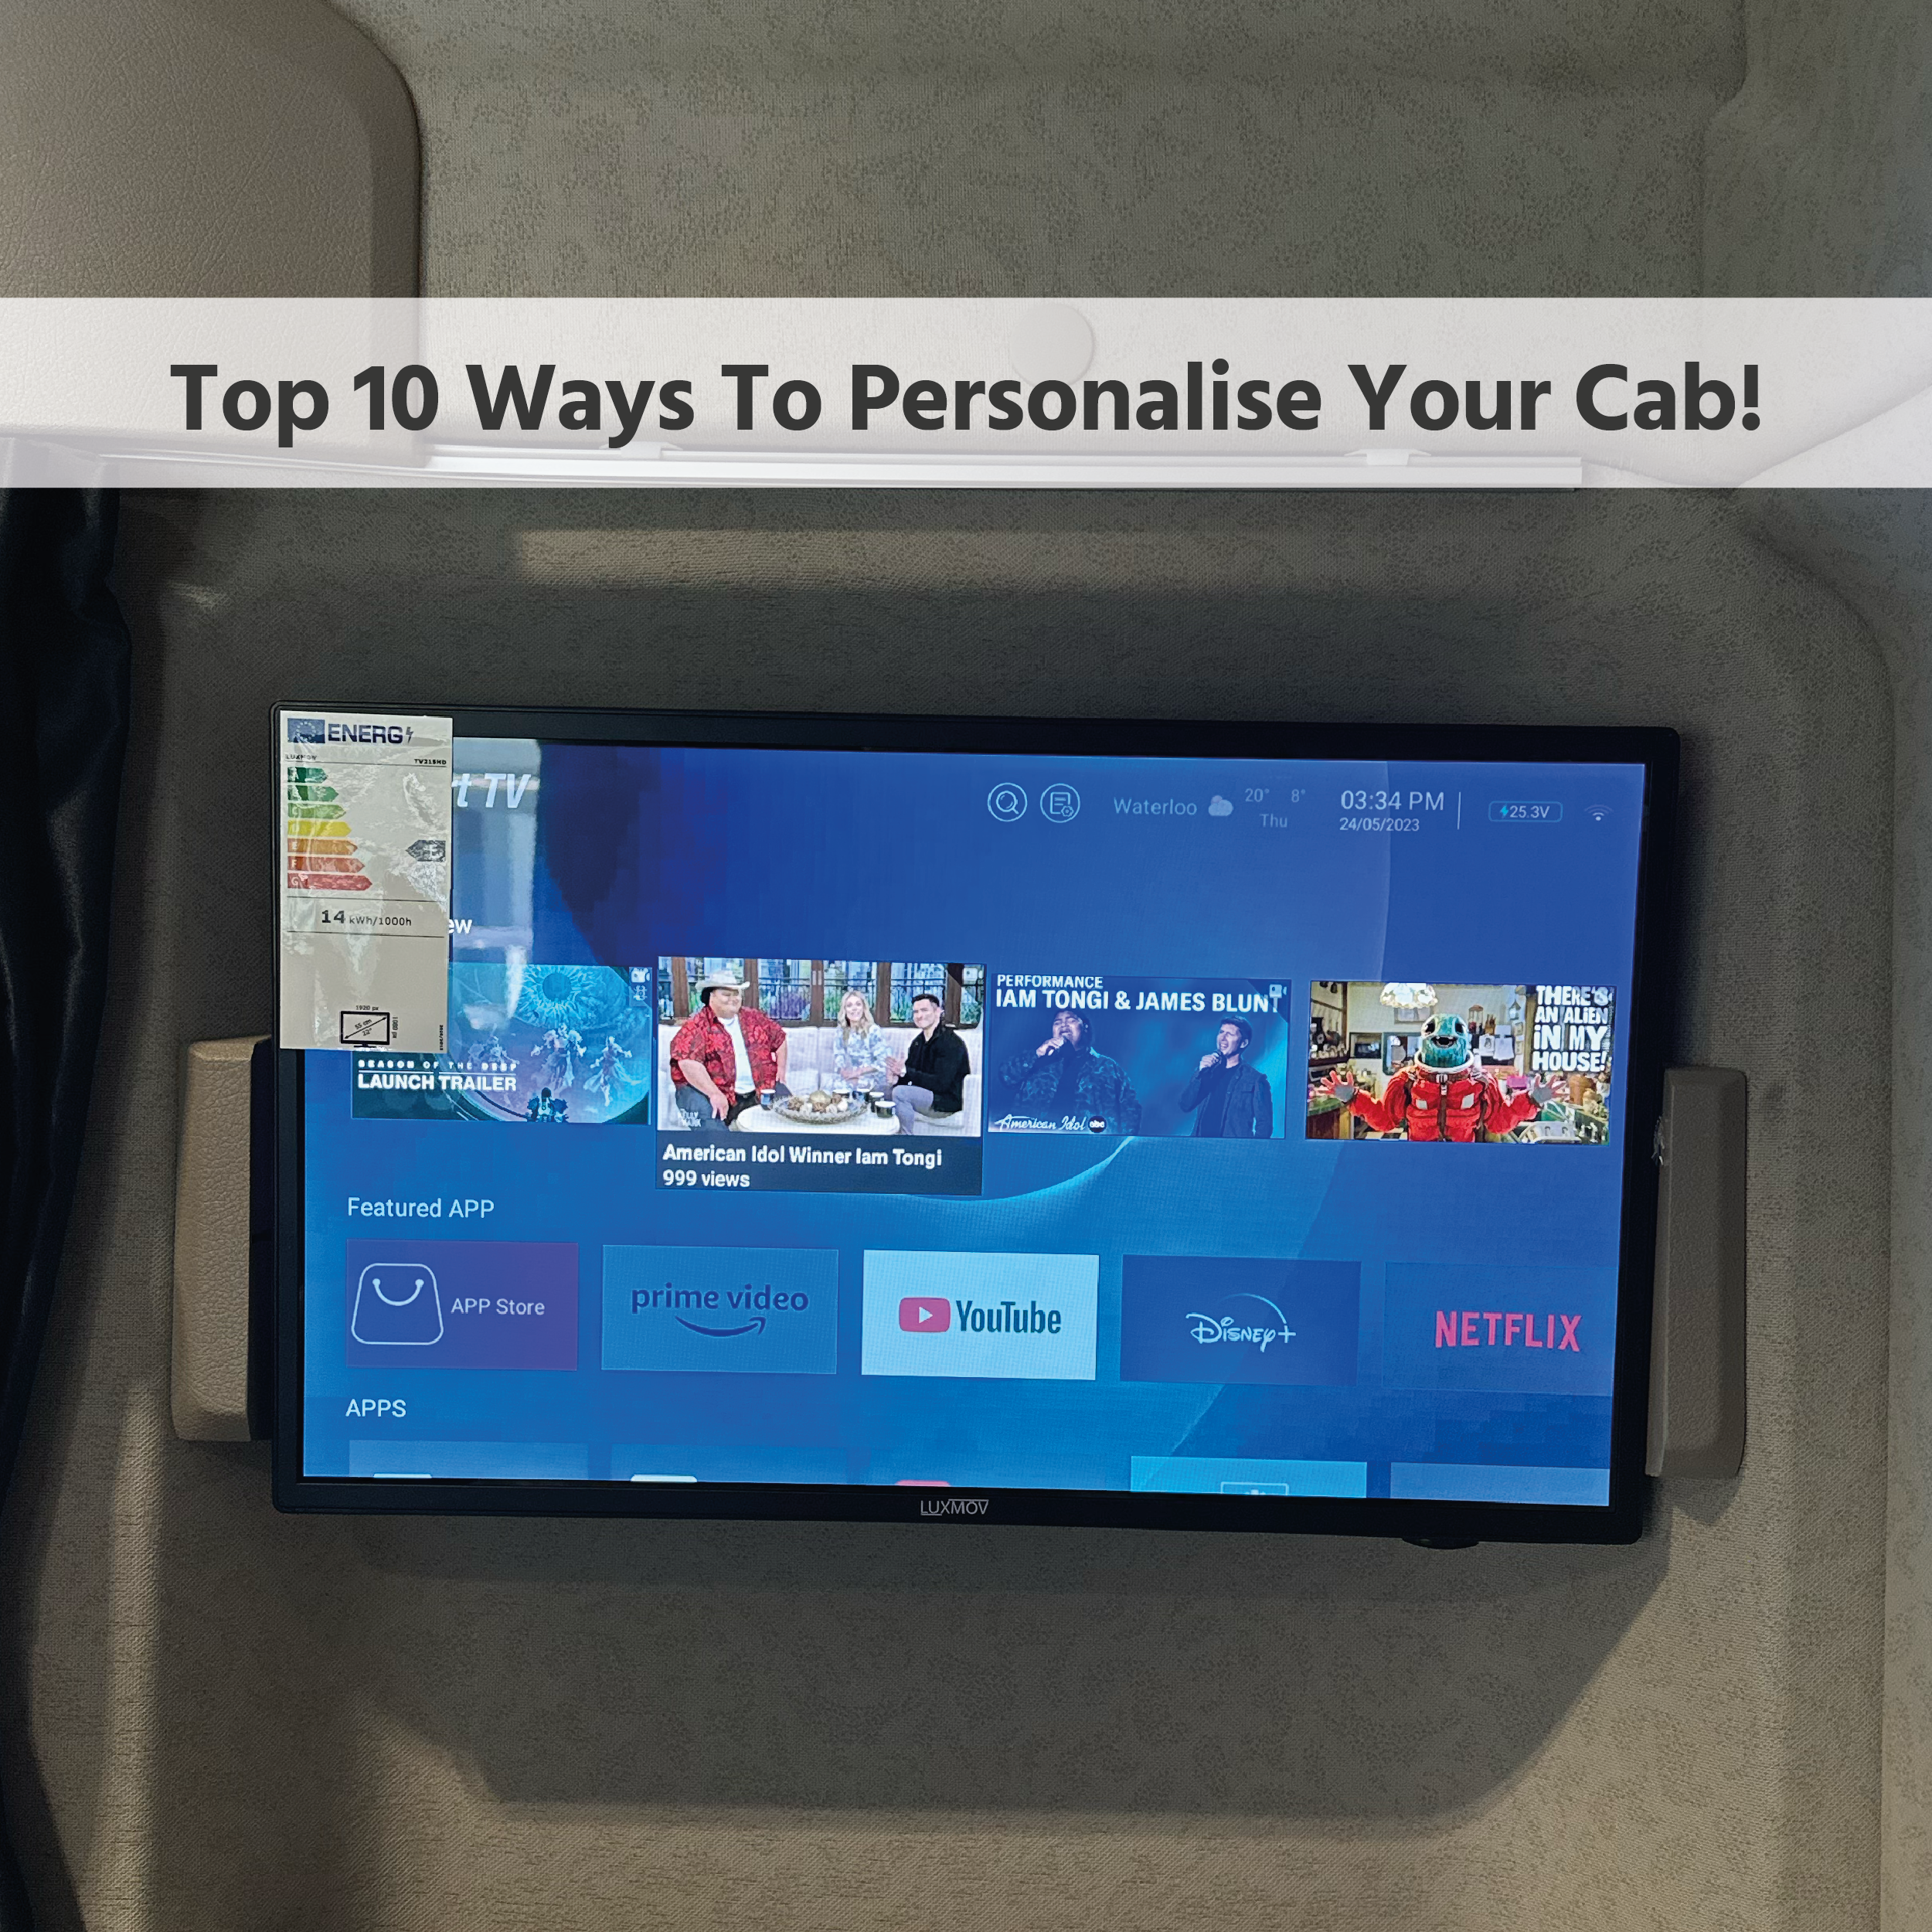 Top 10 Ways To Personalise Your Cab!